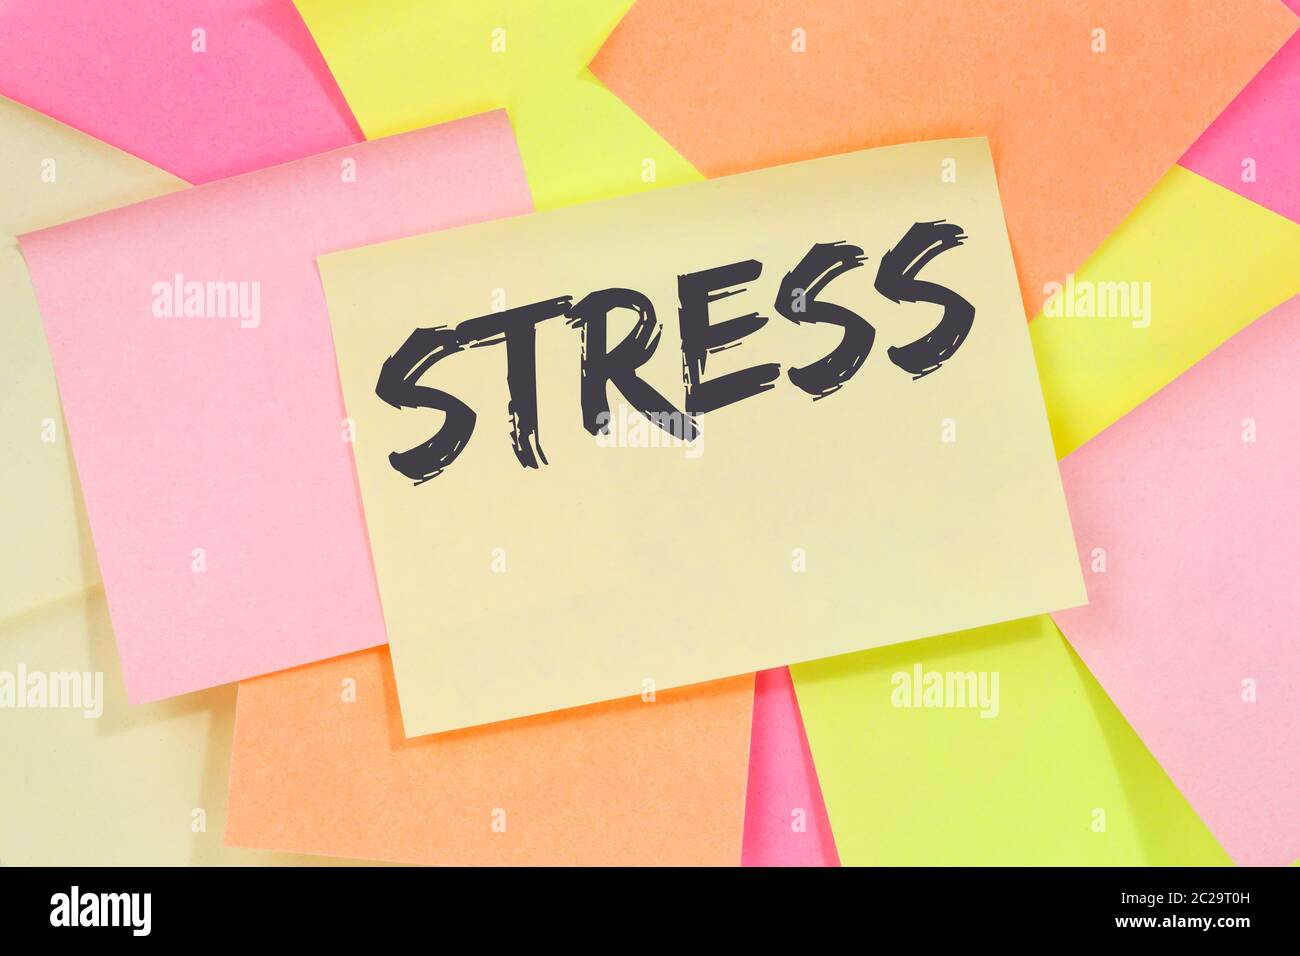 Stress stressed business concept burnout at work relaxed office note paper notepaper Stock Photo